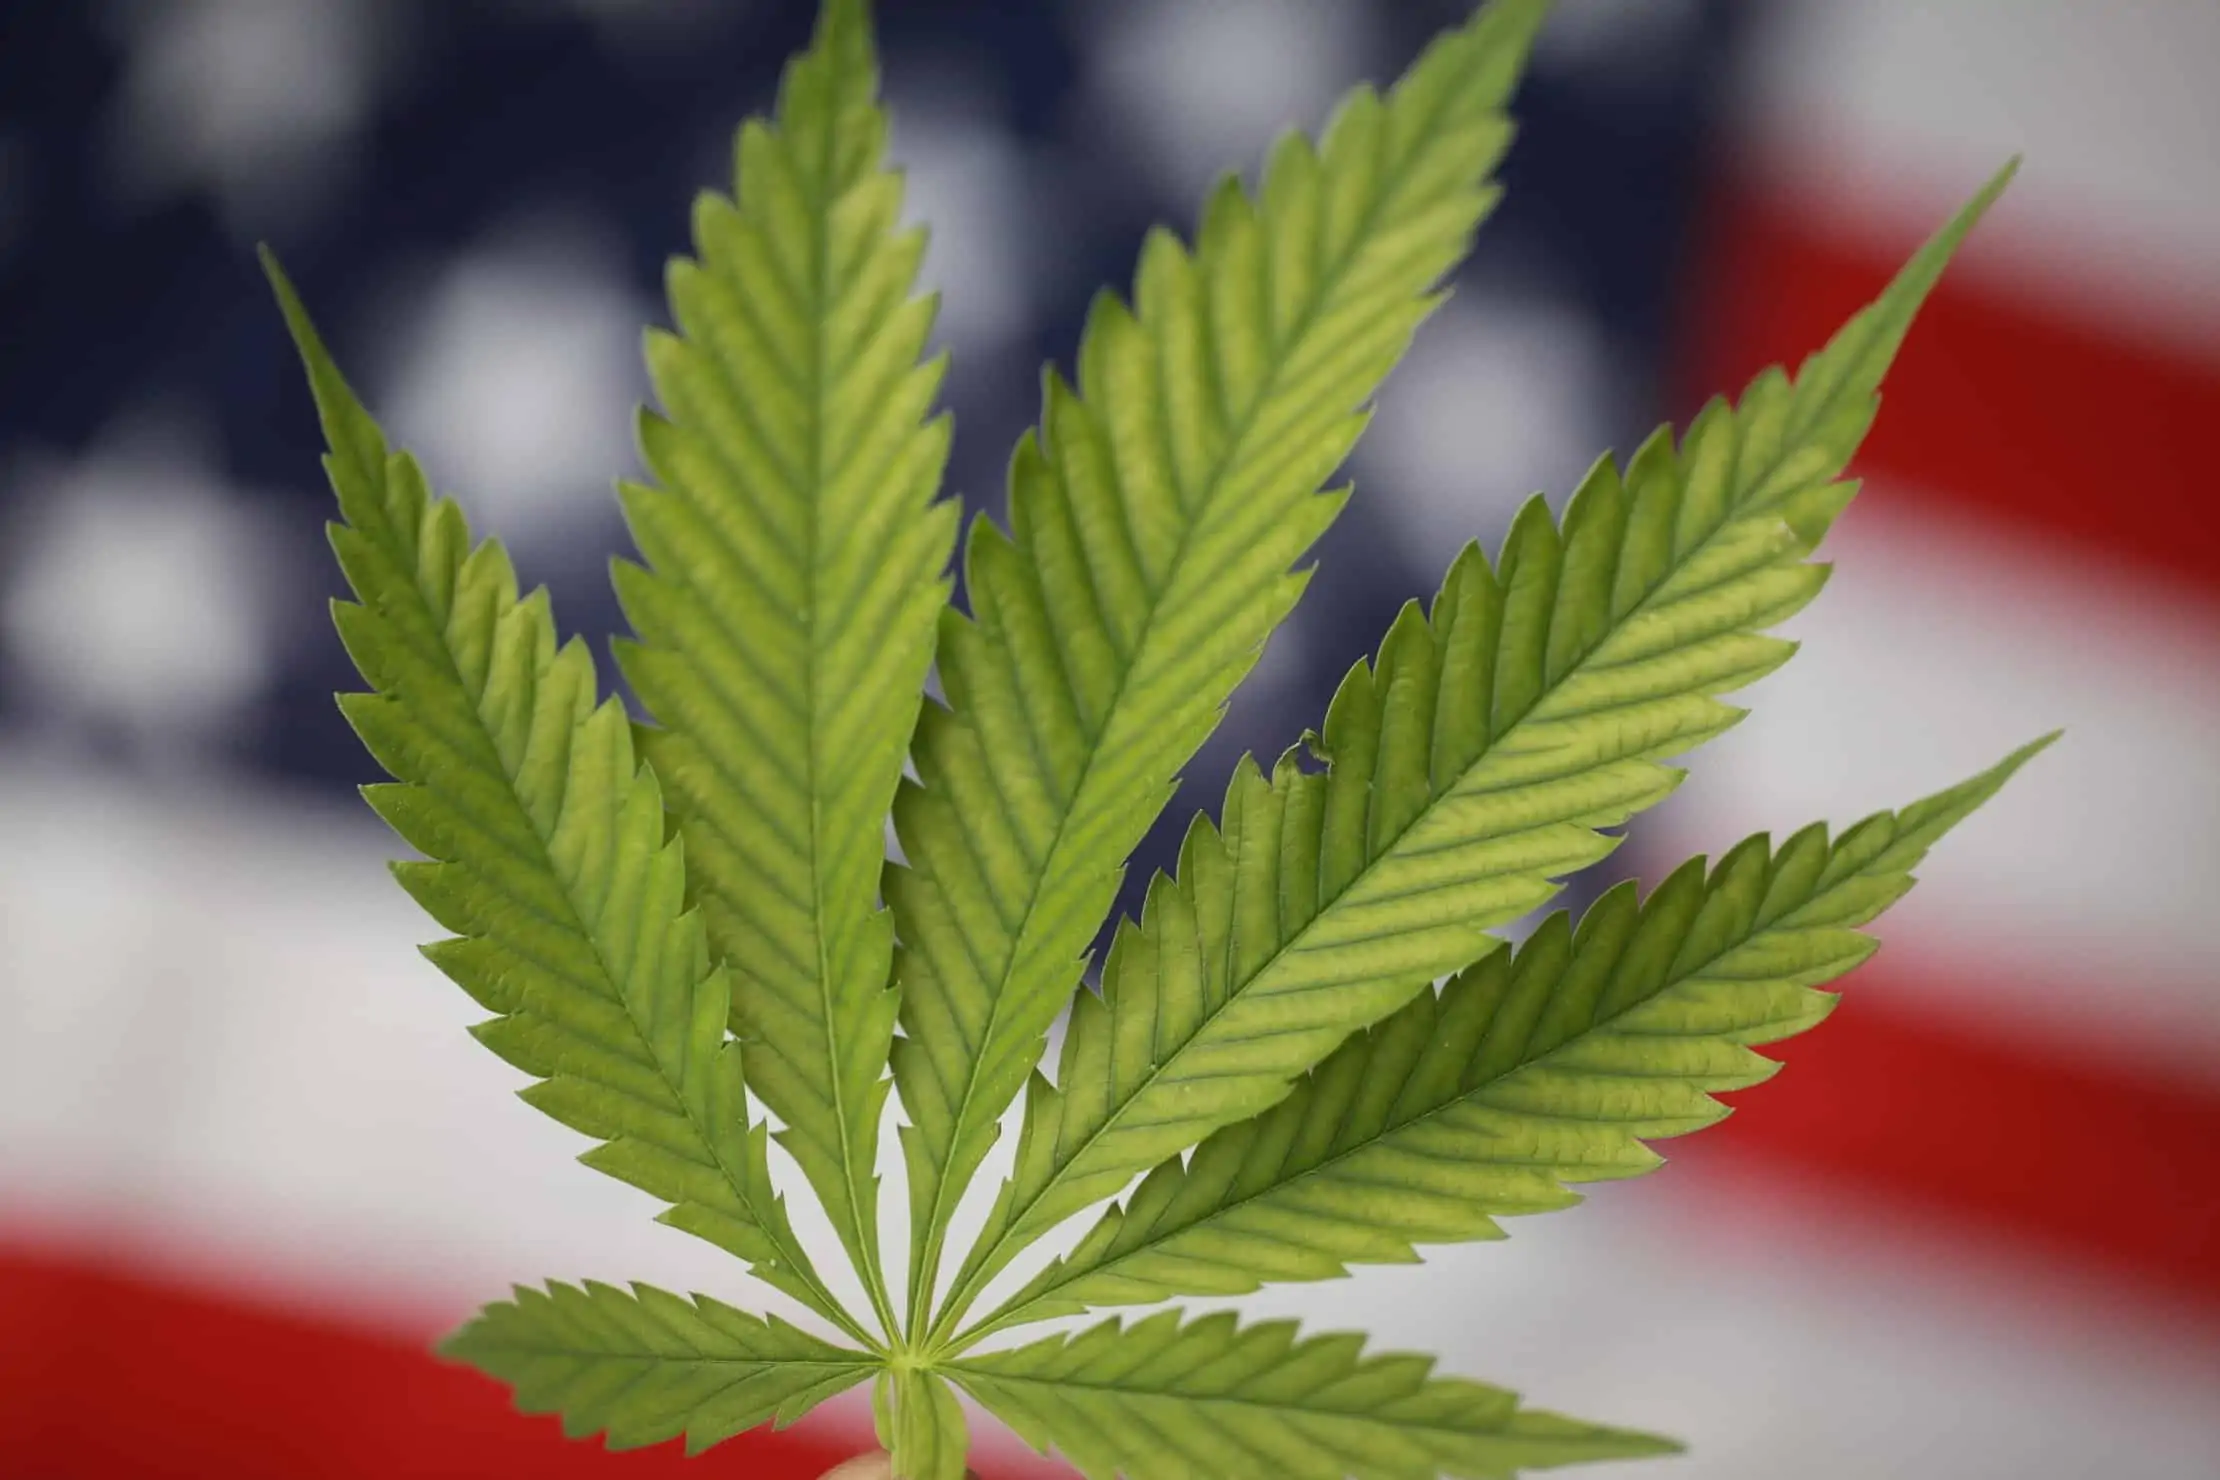 How the 2018 Midterm Election Made It Easier to Access Cannabis